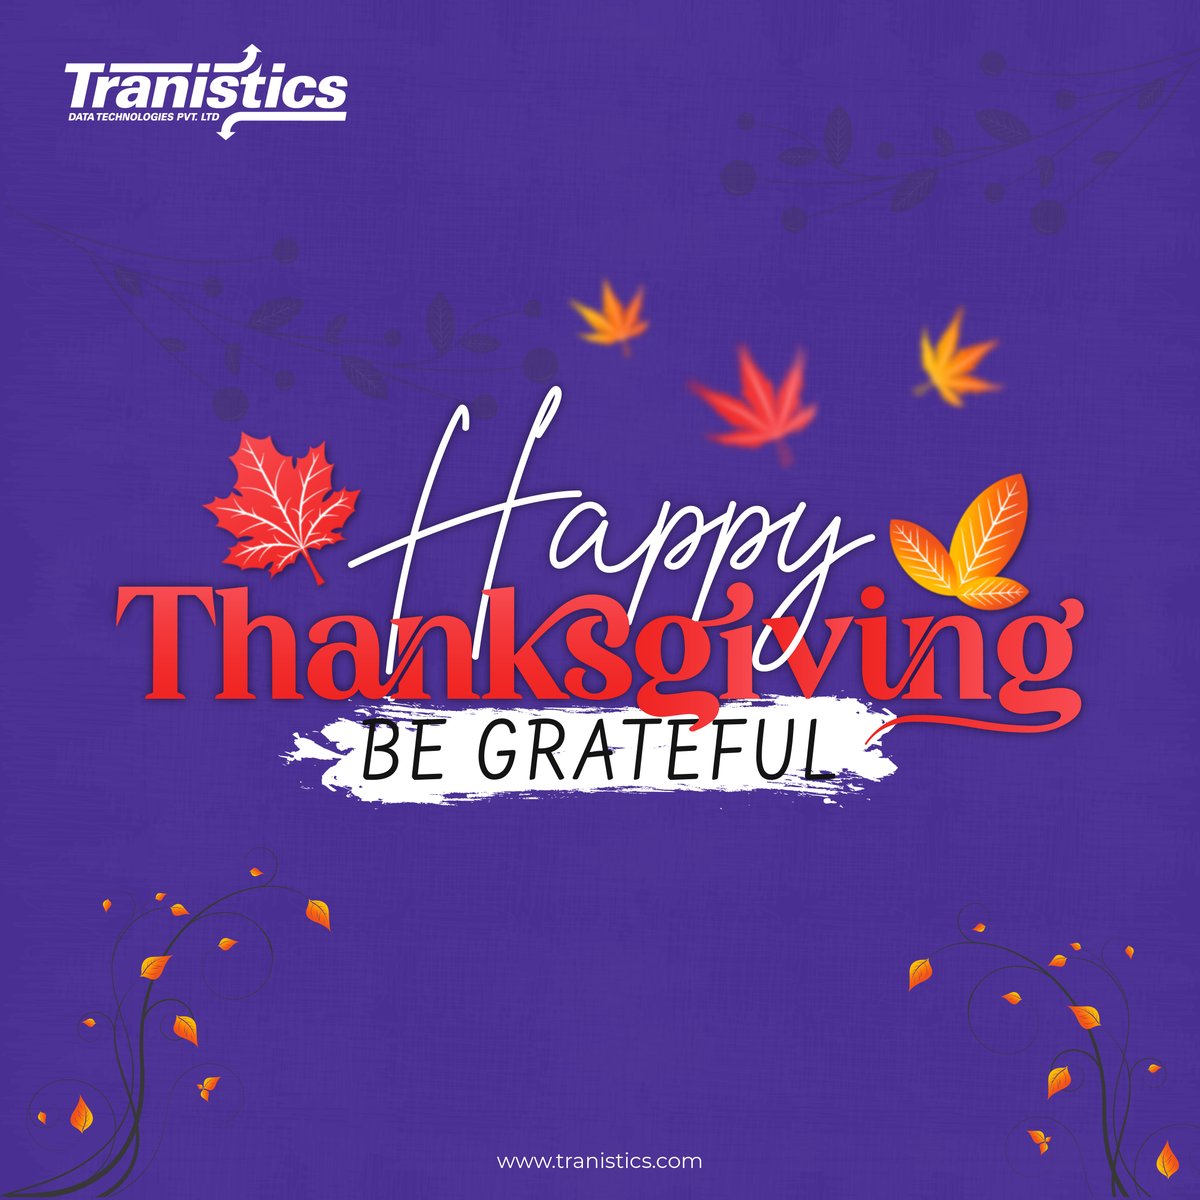 It's time to come together and give thanks for all that we have! Let us celebrate this special day with friends, family, and positivity!  #HappyThanksgiving 🦃 #Tranistics #trustedbusinesspartner #logistics #publishing